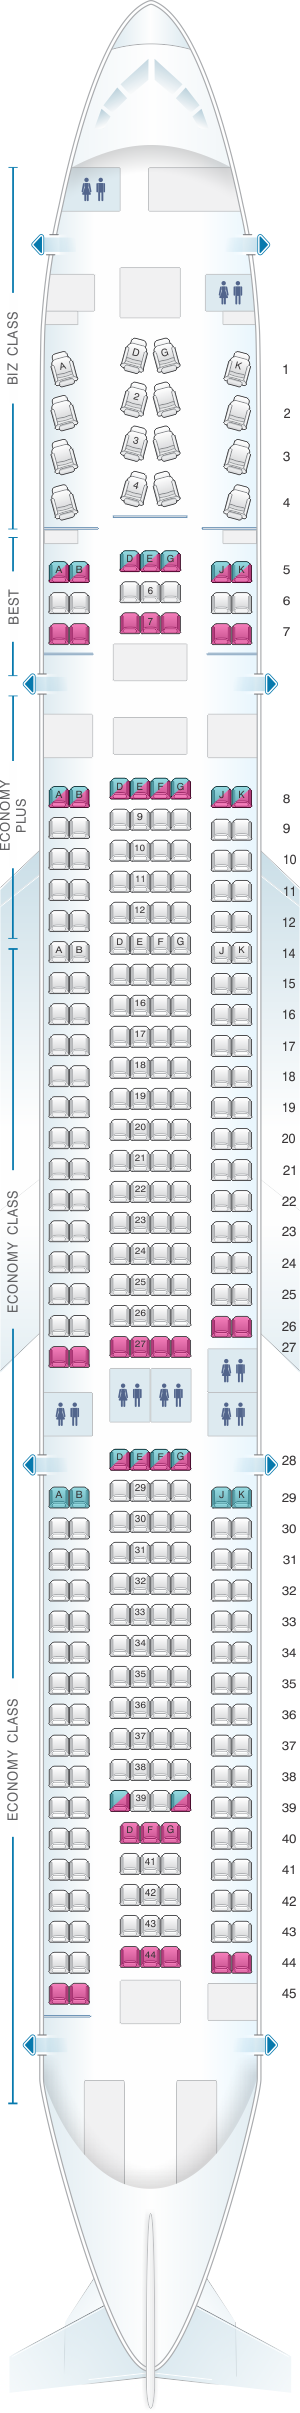 Seat Map Eurowings Airbus A330 300 | SeatMaestro